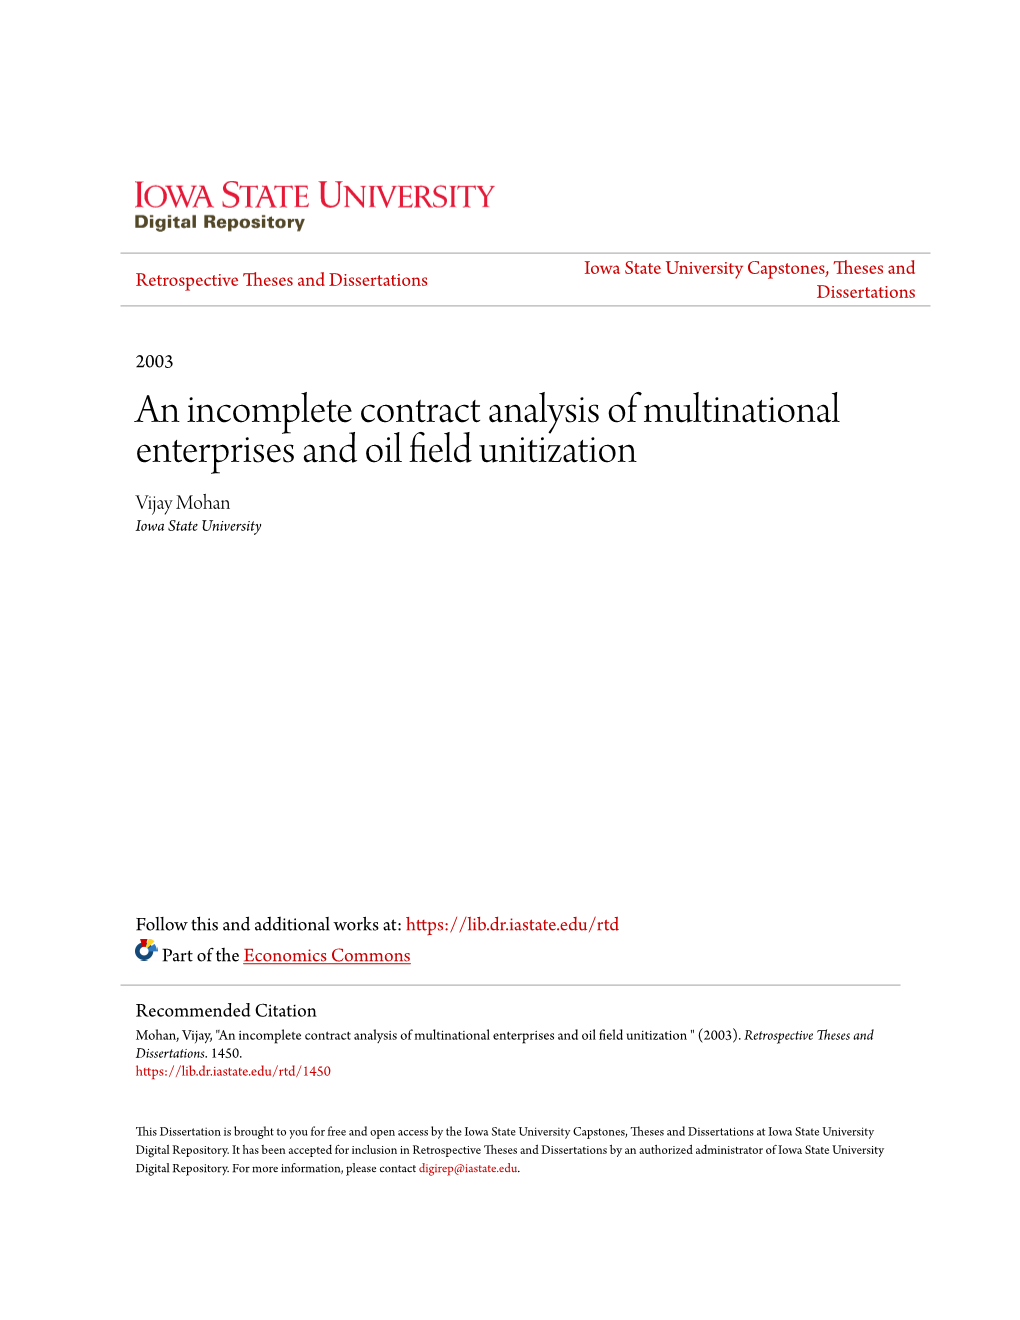 An Incomplete Contract Analysis of Multinational Enterprises and Oil Field Unitization Vijay Mohan Iowa State University